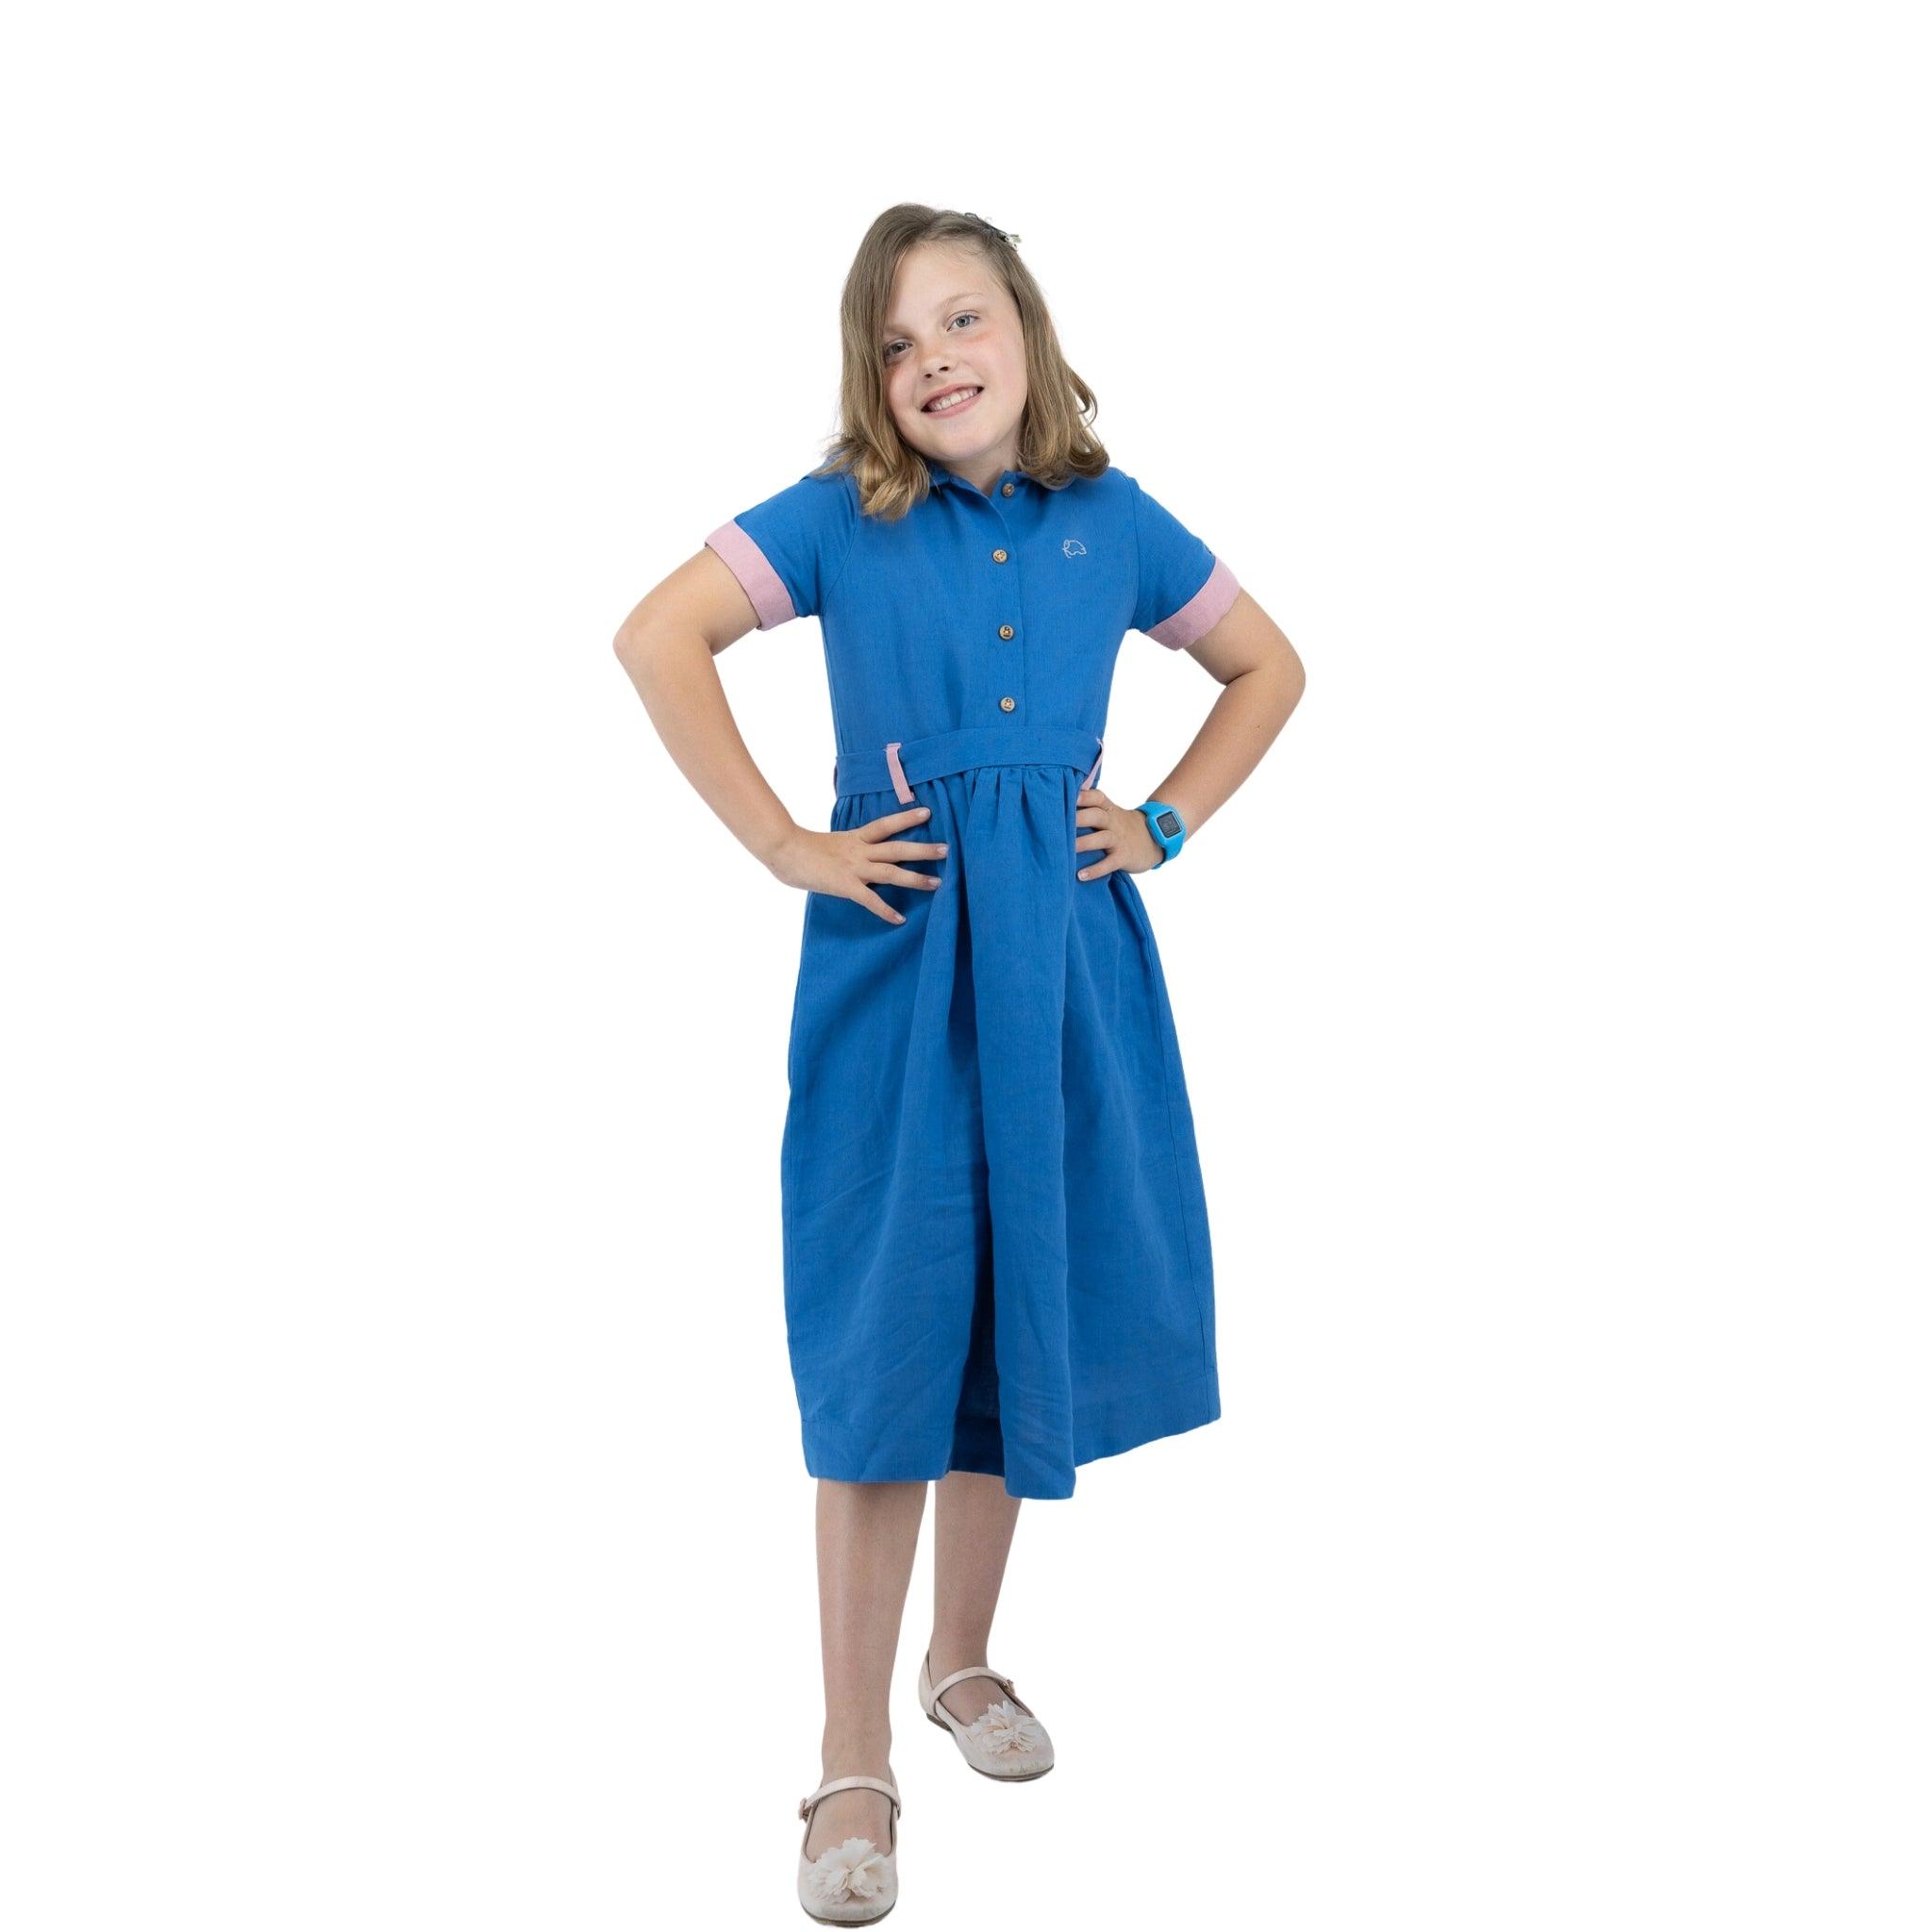 Young girl in a Karee Parisian Blue Linen Dress for Girls standing with hands on hips and smiling, isolated on white background.